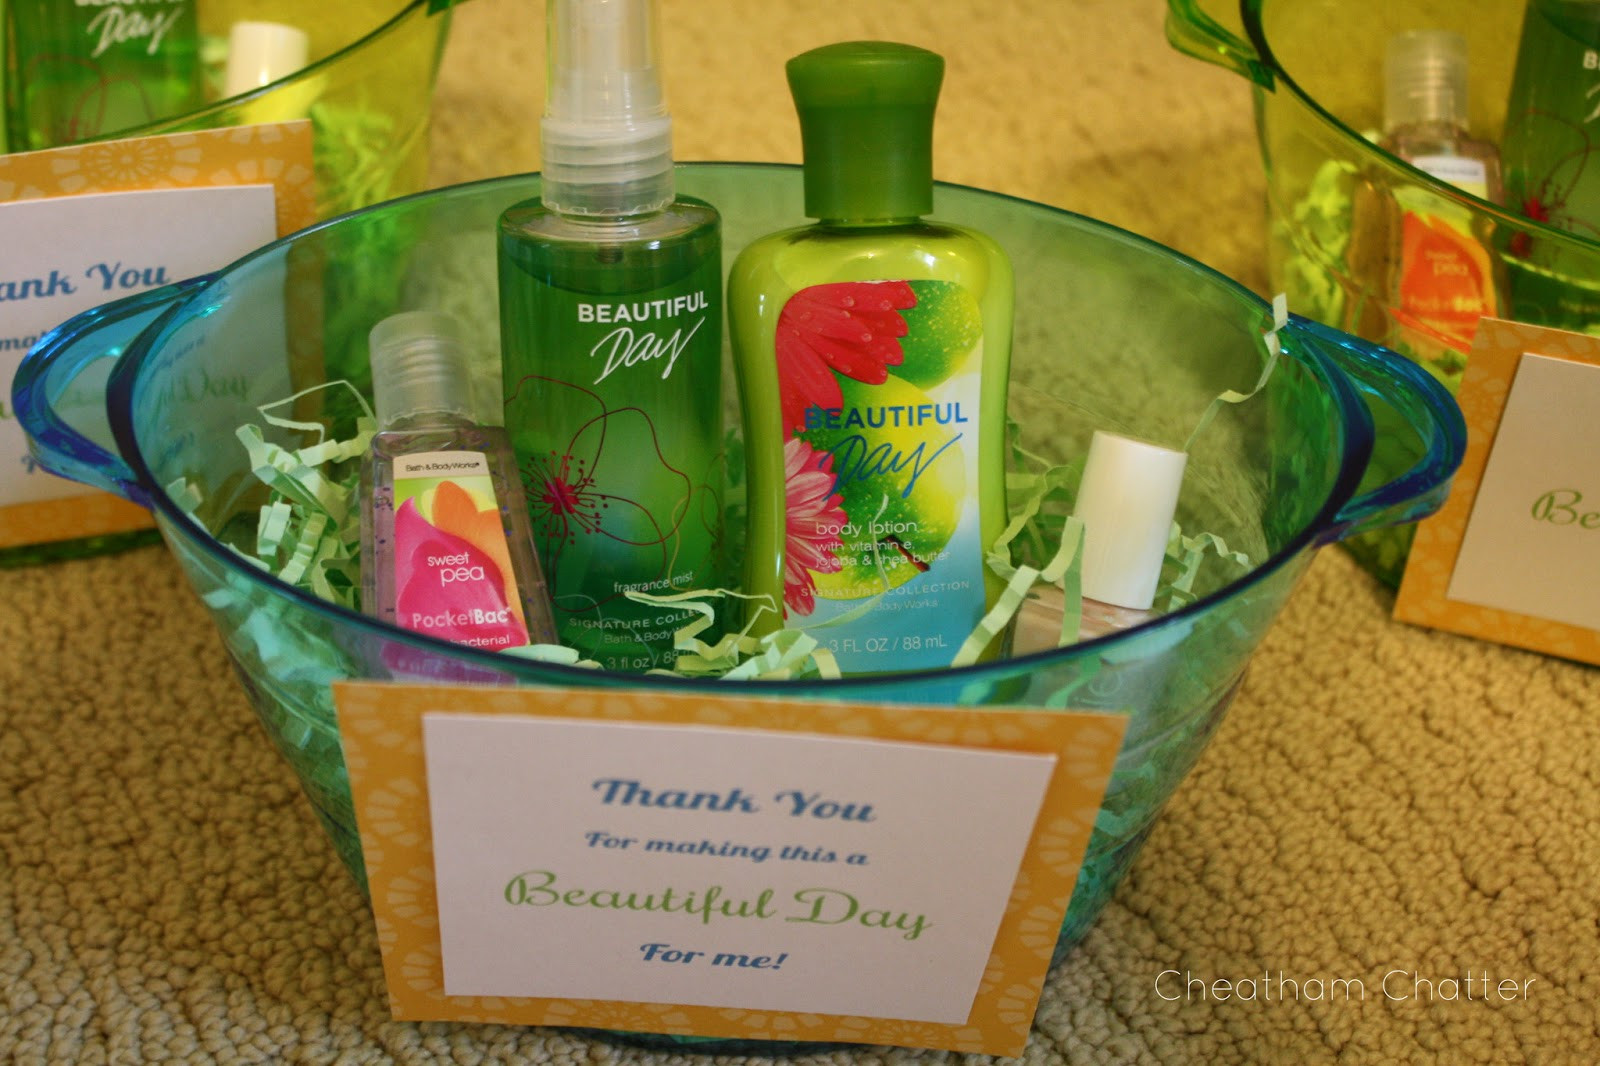 Thank You Gift Ideas For Baby Shower Guests
 Cheatham Chatter Baby Shower Favors & Hostess Gifts